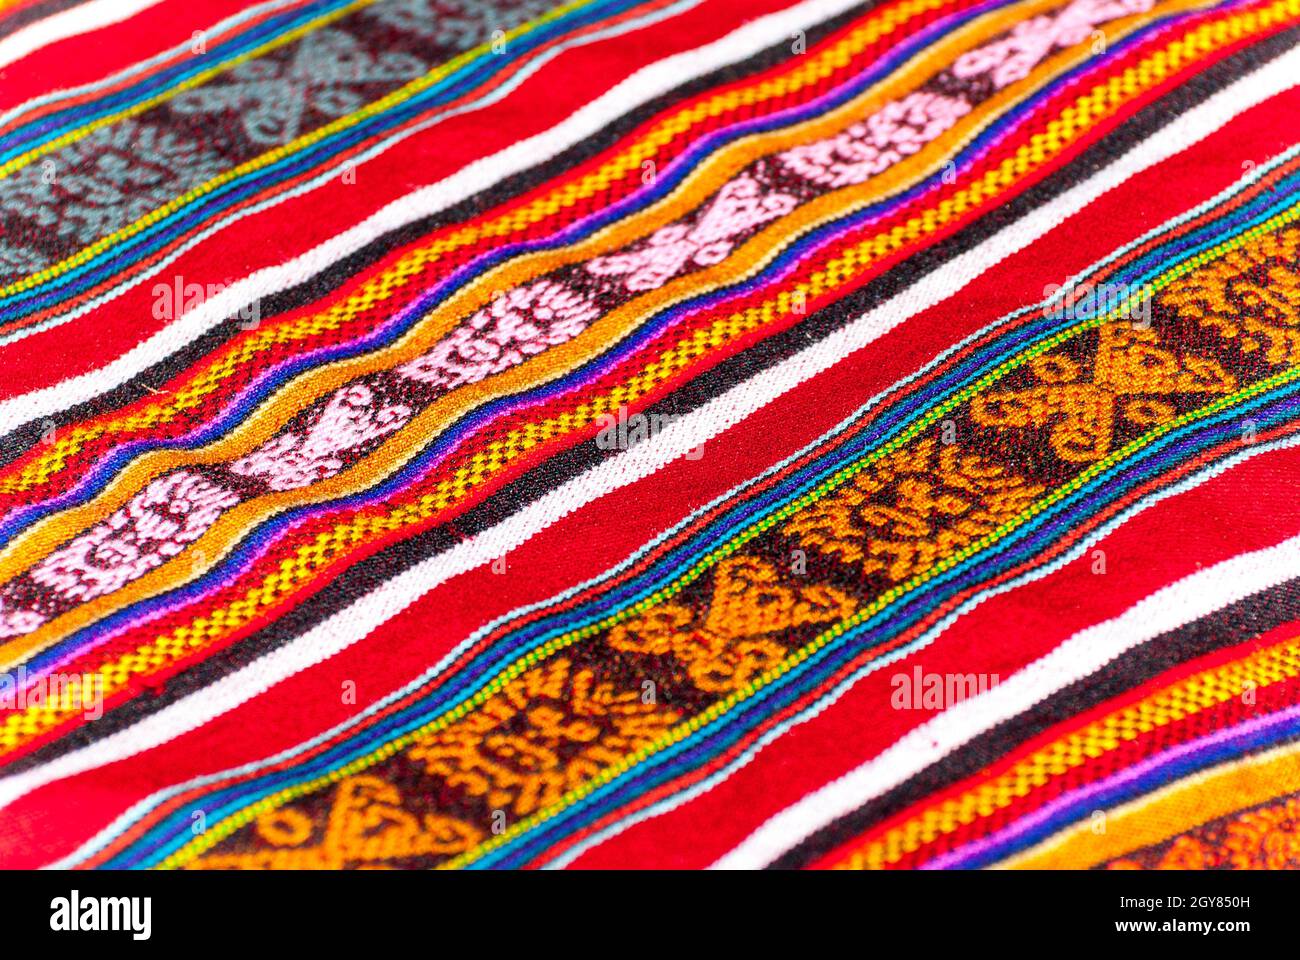 Colorful peruvian rug background Stock Photo